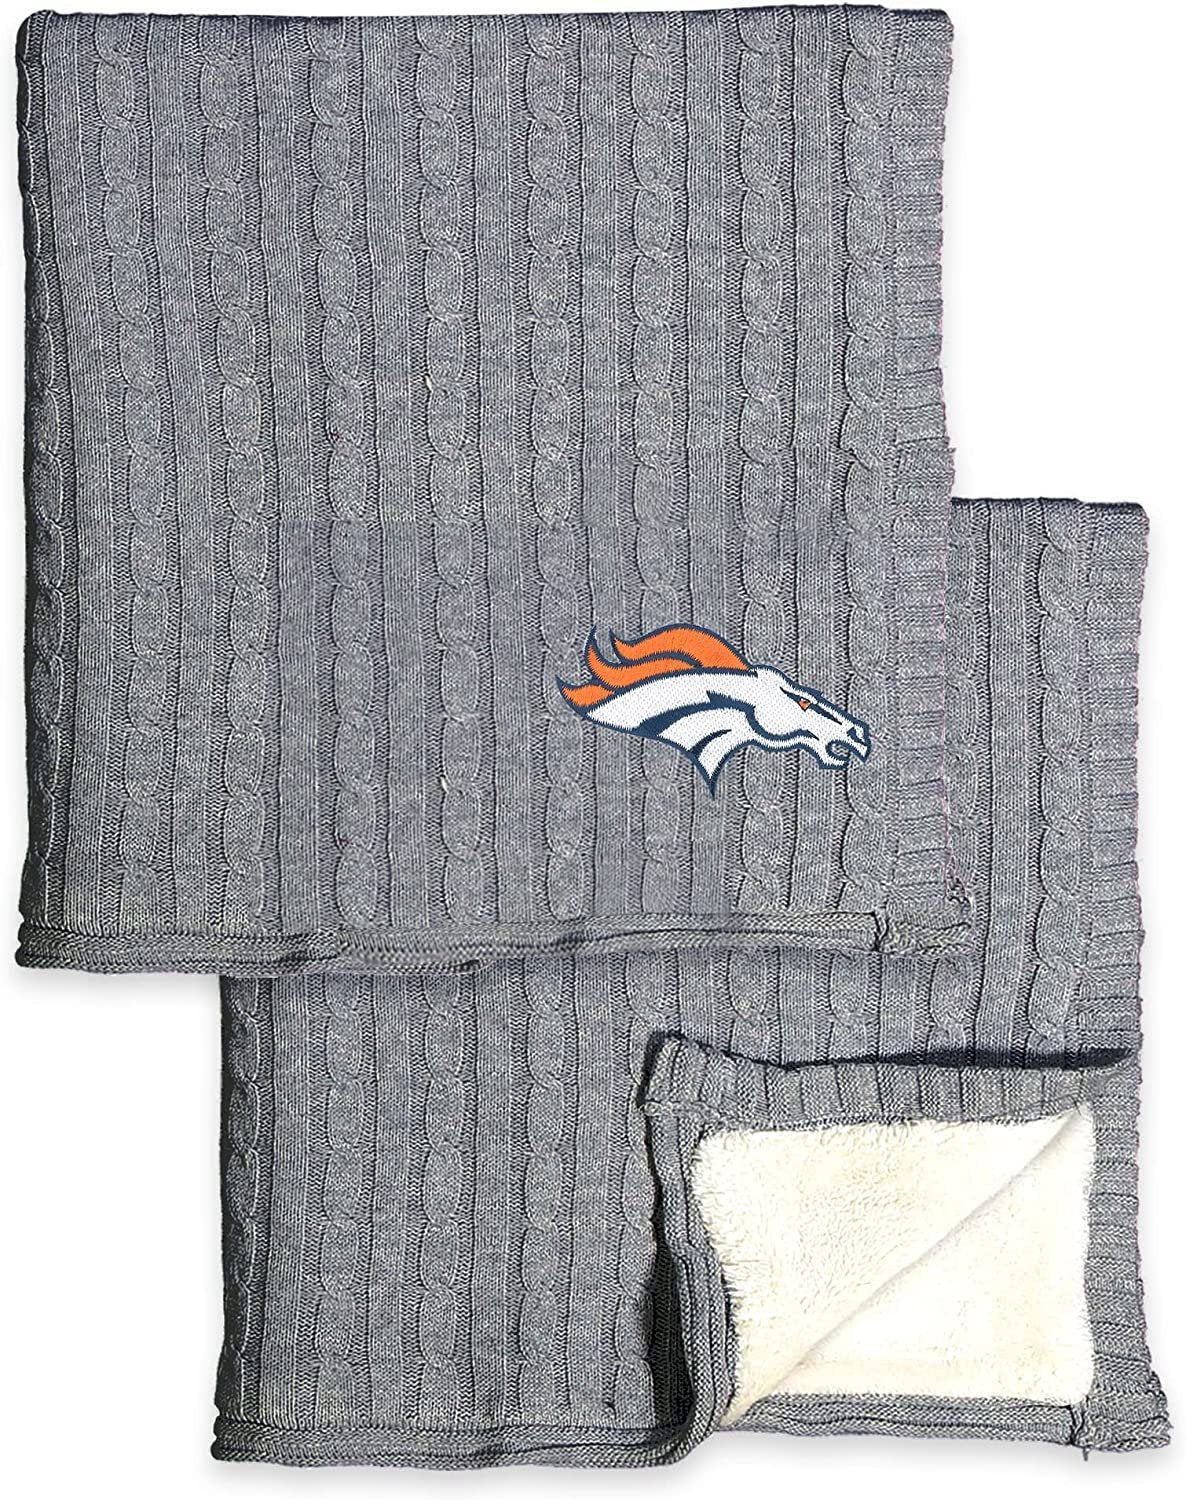 Denver Broncos Cable Sweater Knit Sherpa Throw Blanket 50x60 Inch Adult